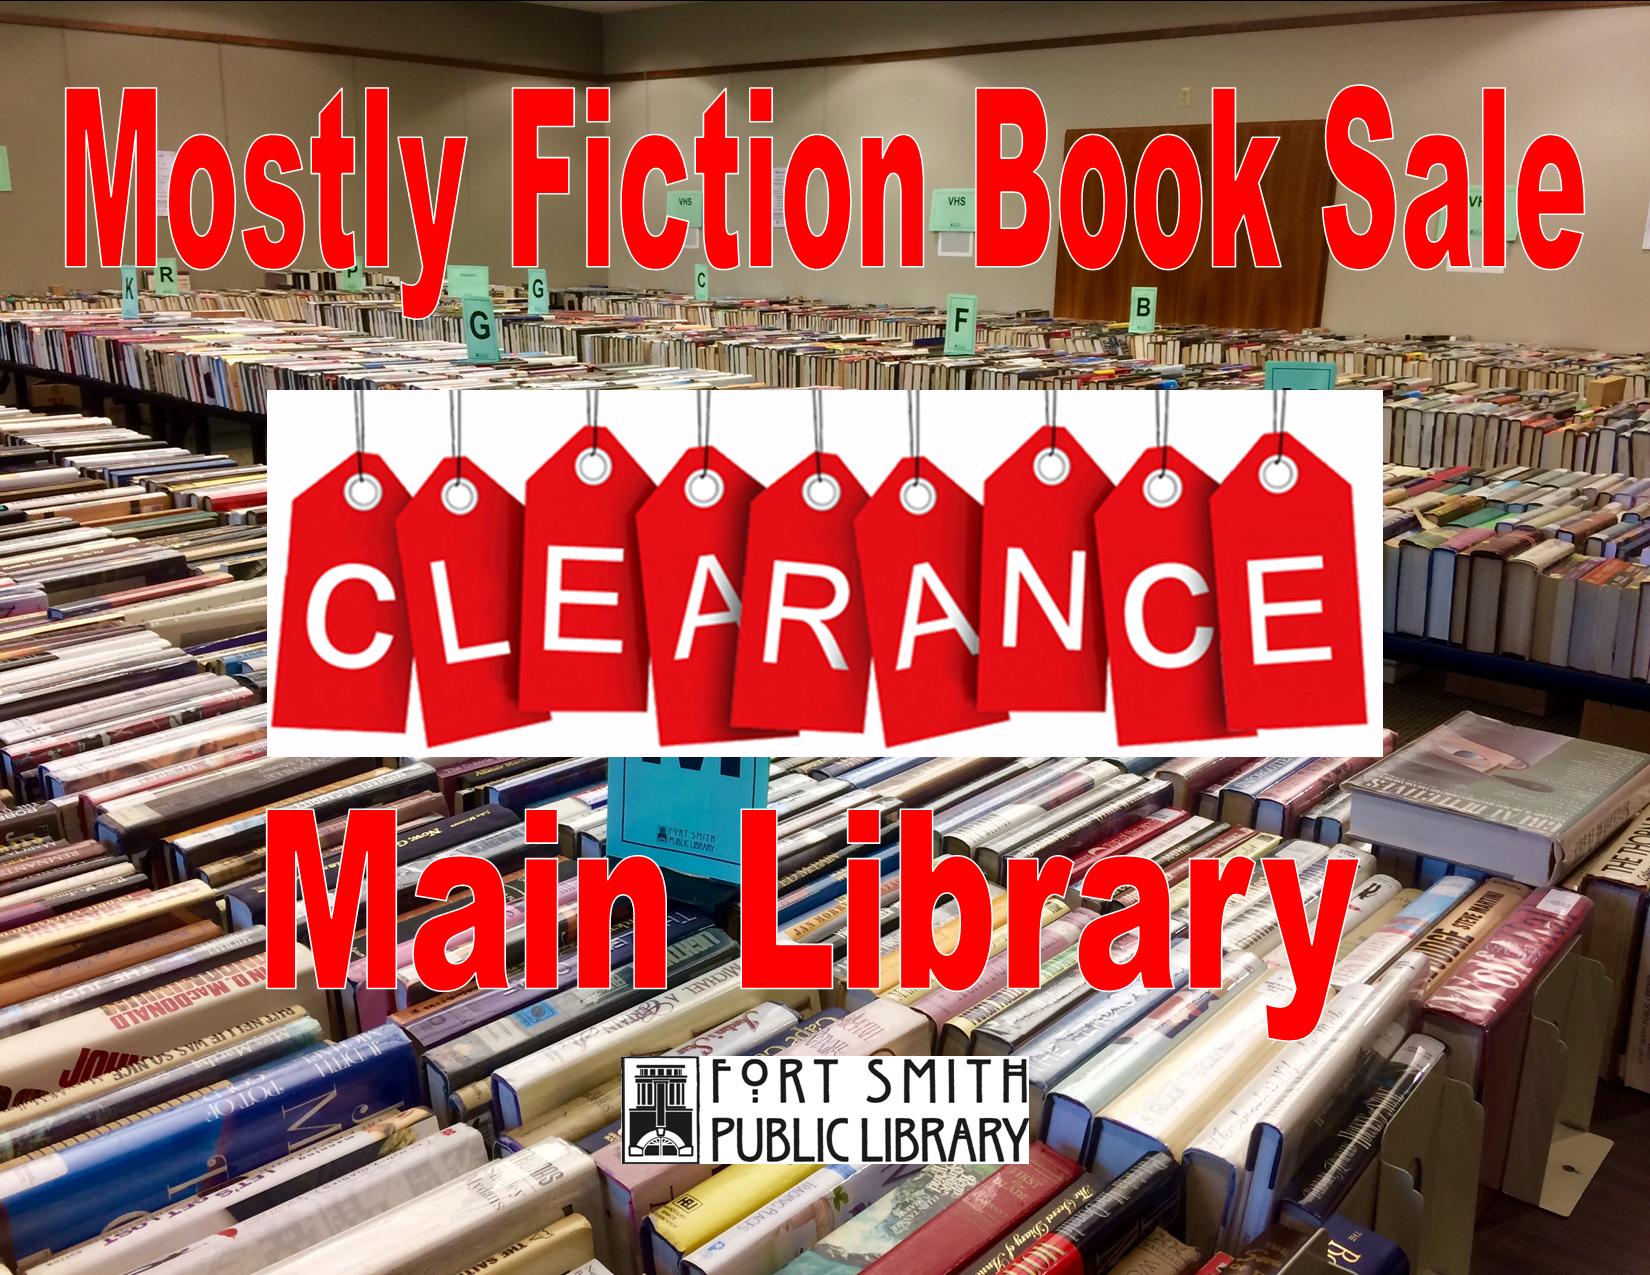 poster announcing book sale clearance